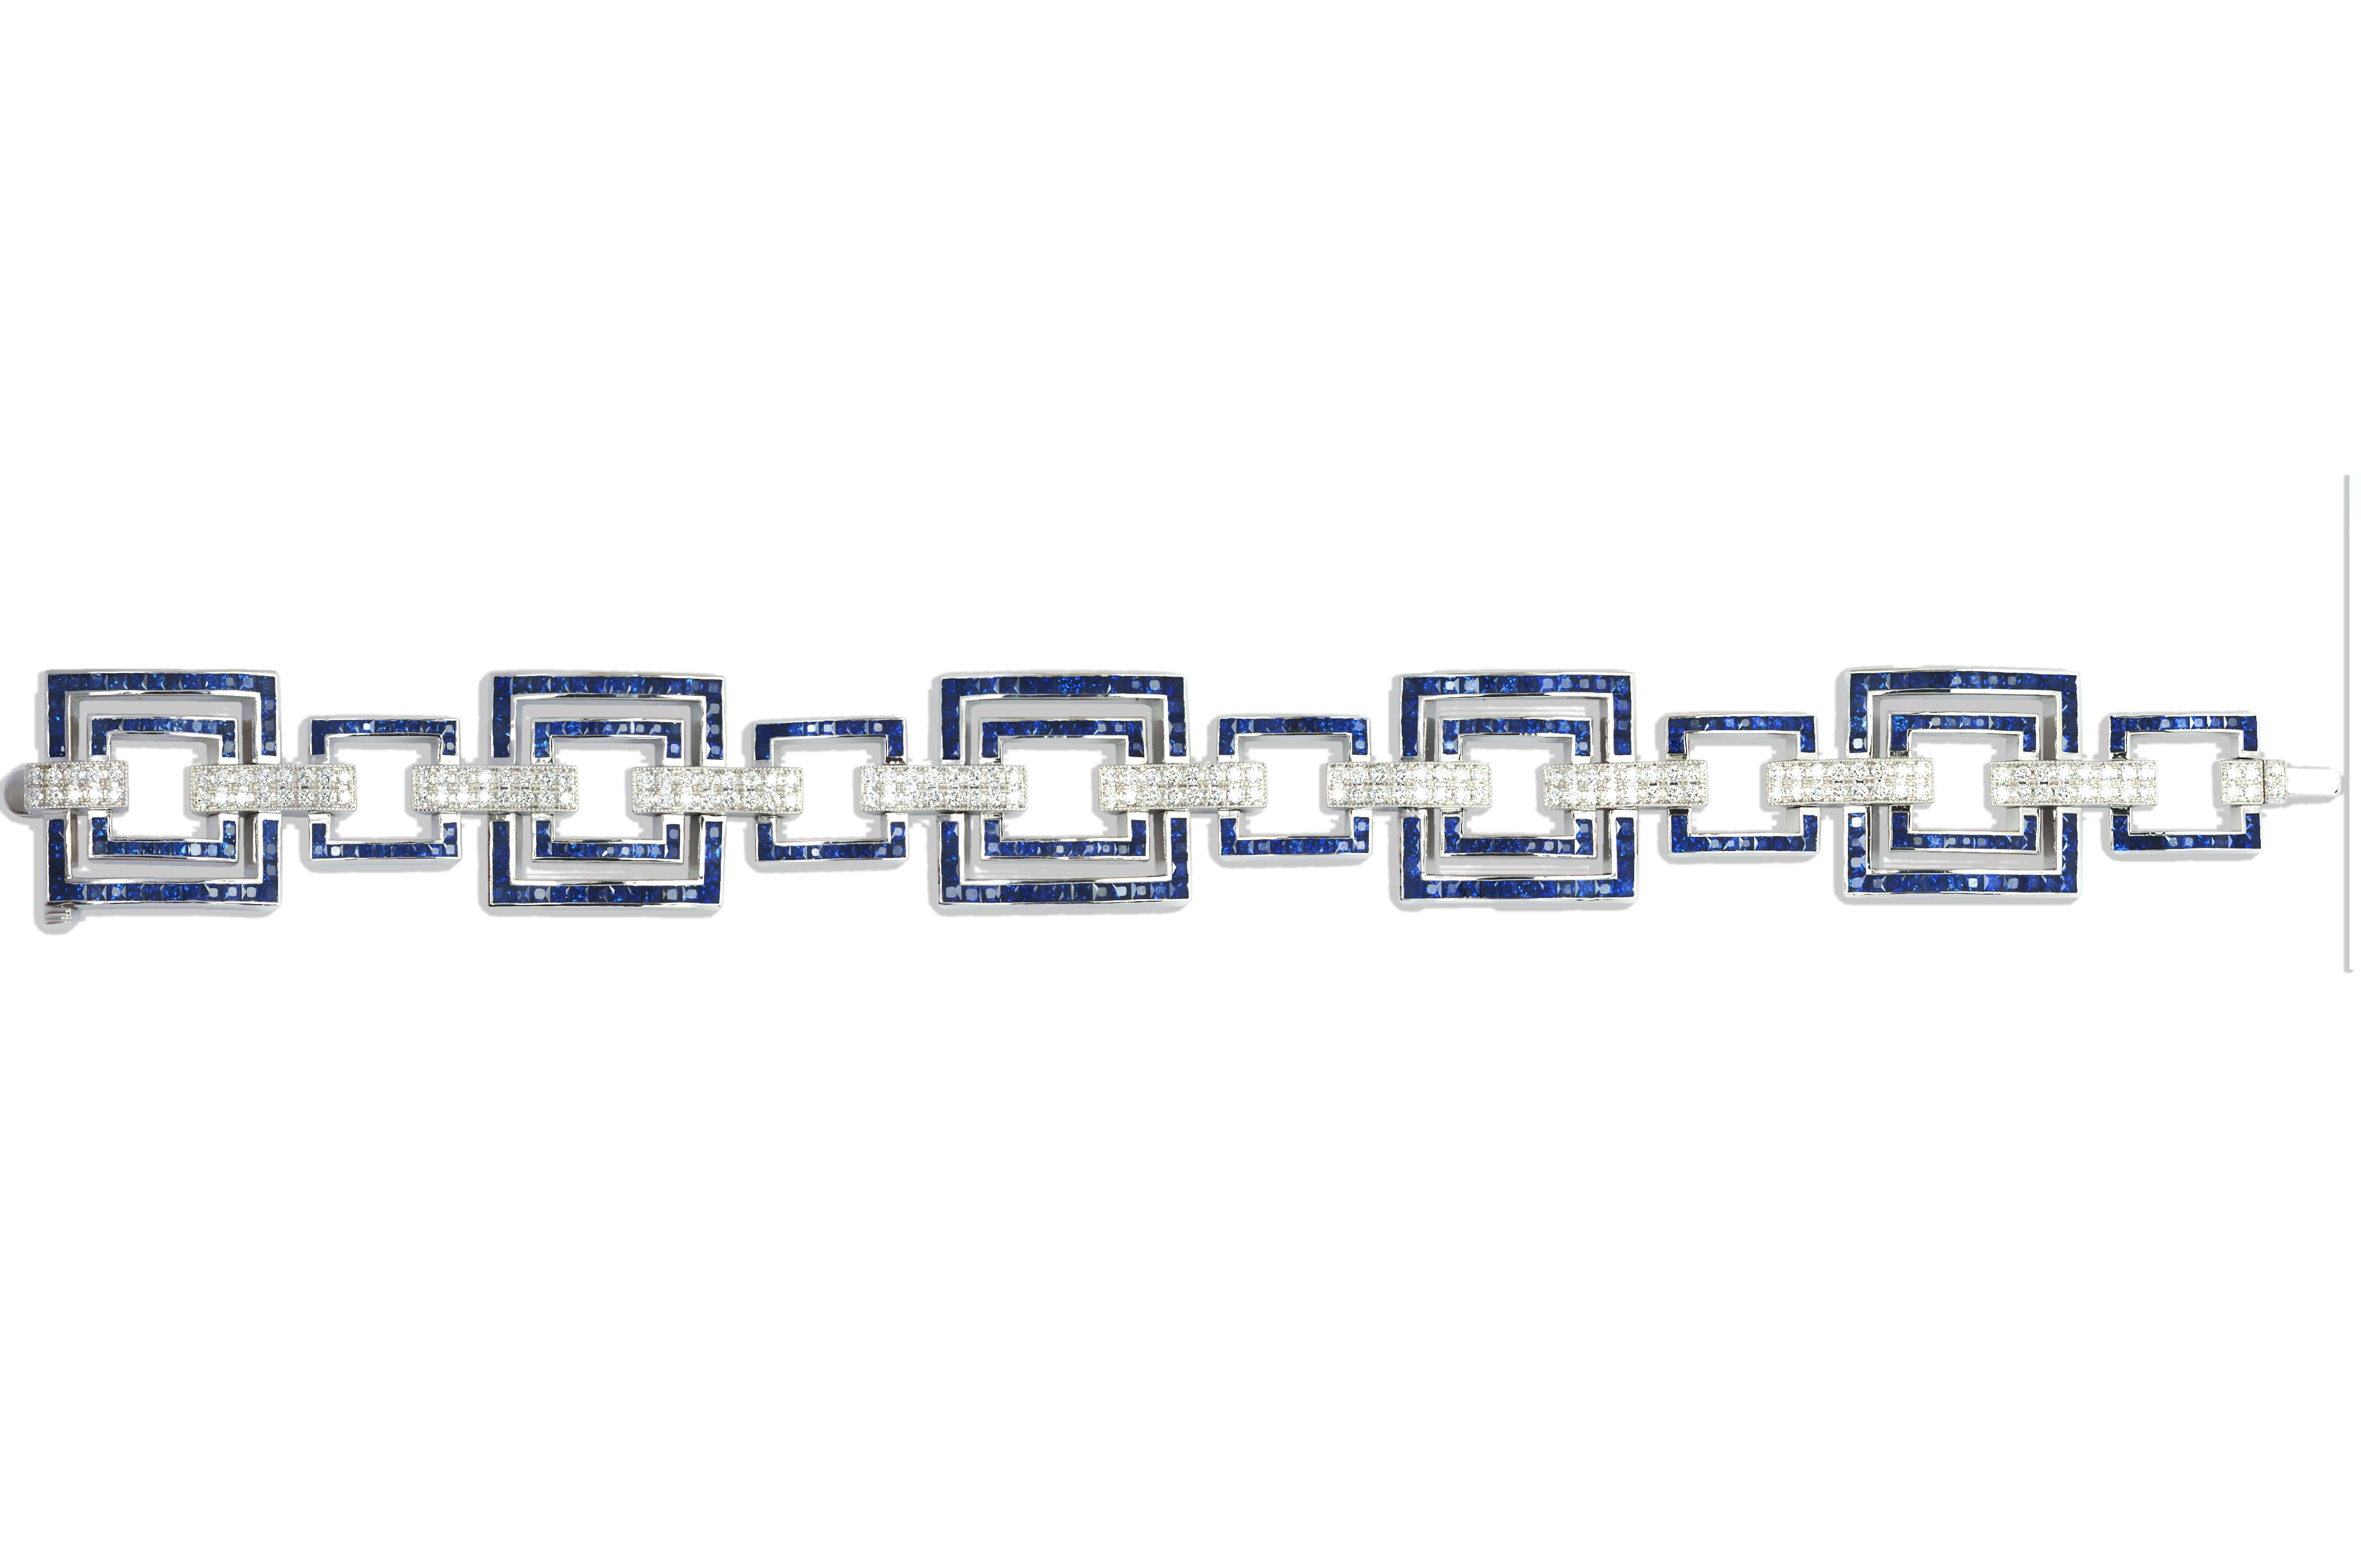 Blue Sapphire 13.43 cts with Diamond 2.13 cts Bracelet in 18k White Gold Settings

A statement modern Art Deco blue sapphire and diamond bracelet / bangle that you can easily dress up or down. The clean simple lines makes it a standout piece.